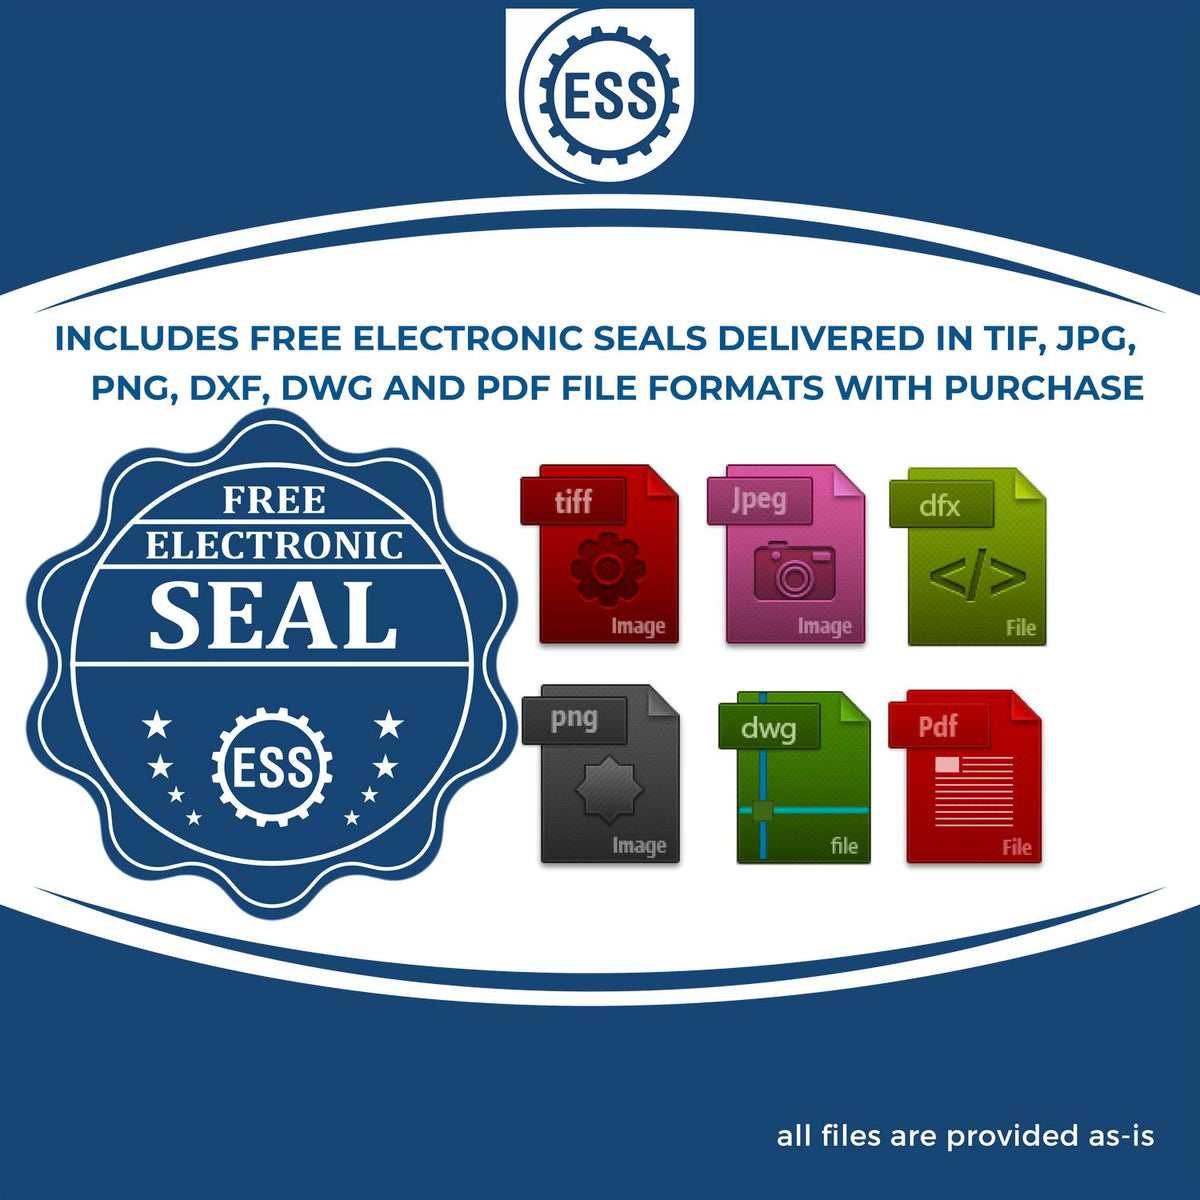 An infographic for the free electronic seal for the Missouri Professional Geologist Seal Stamp illustrating the different file type icons such as DXF, DWG, TIF, JPG and PNG.